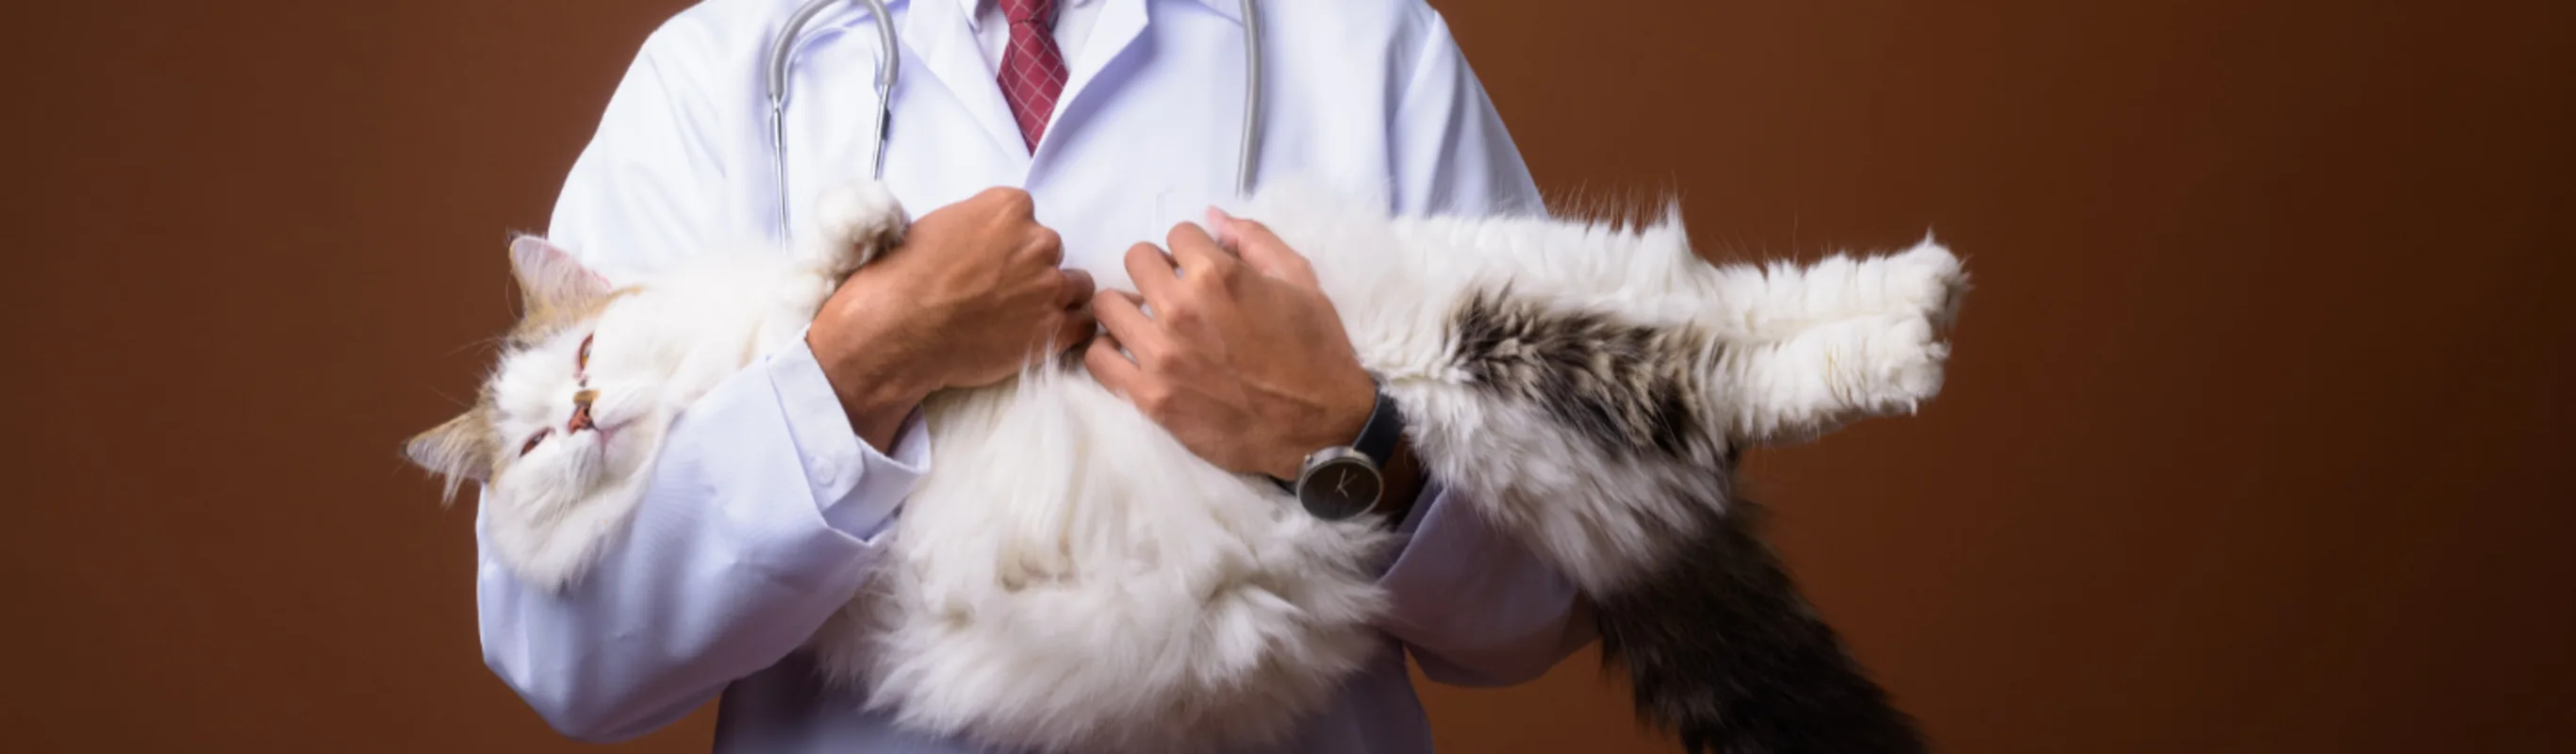 Veterinarian Holding a White Cat